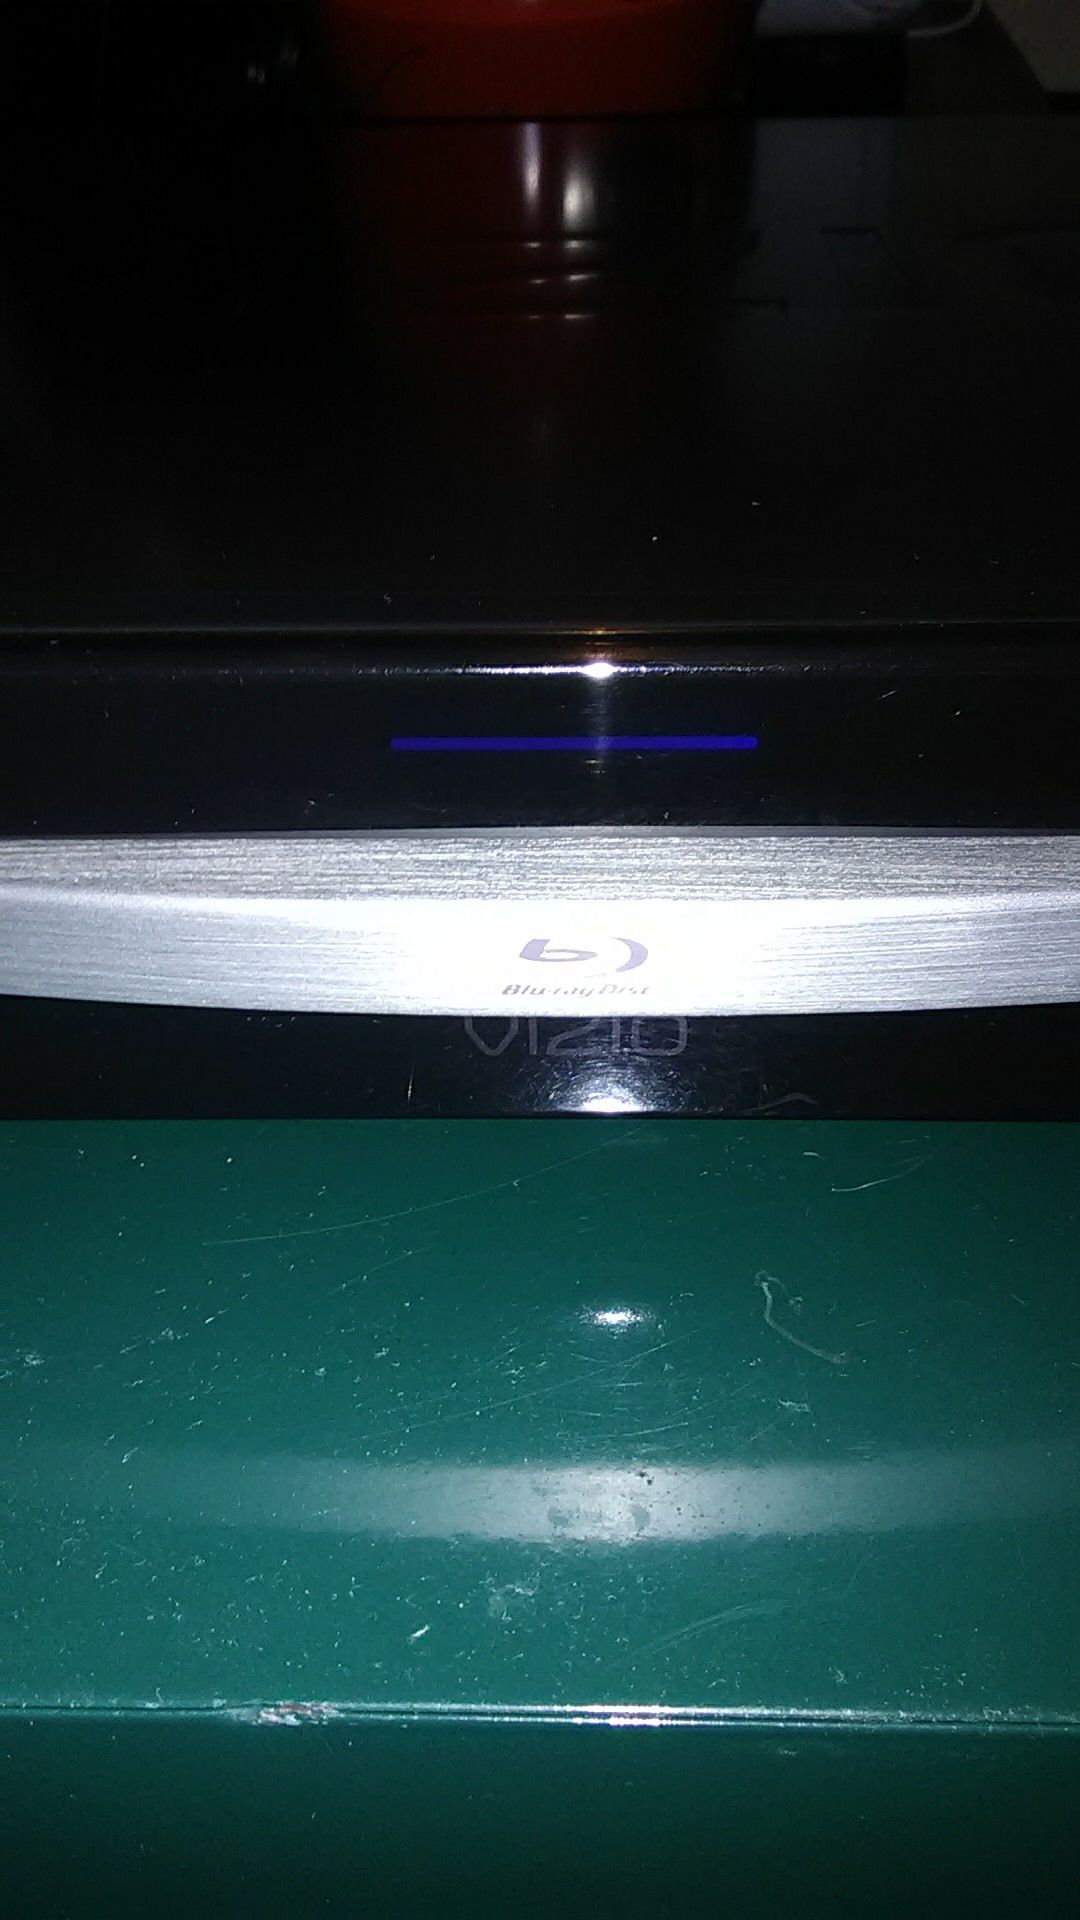 VIZIO Blu-ray DVD player w/ WiFi incorporated ready for streaming with remote works great.